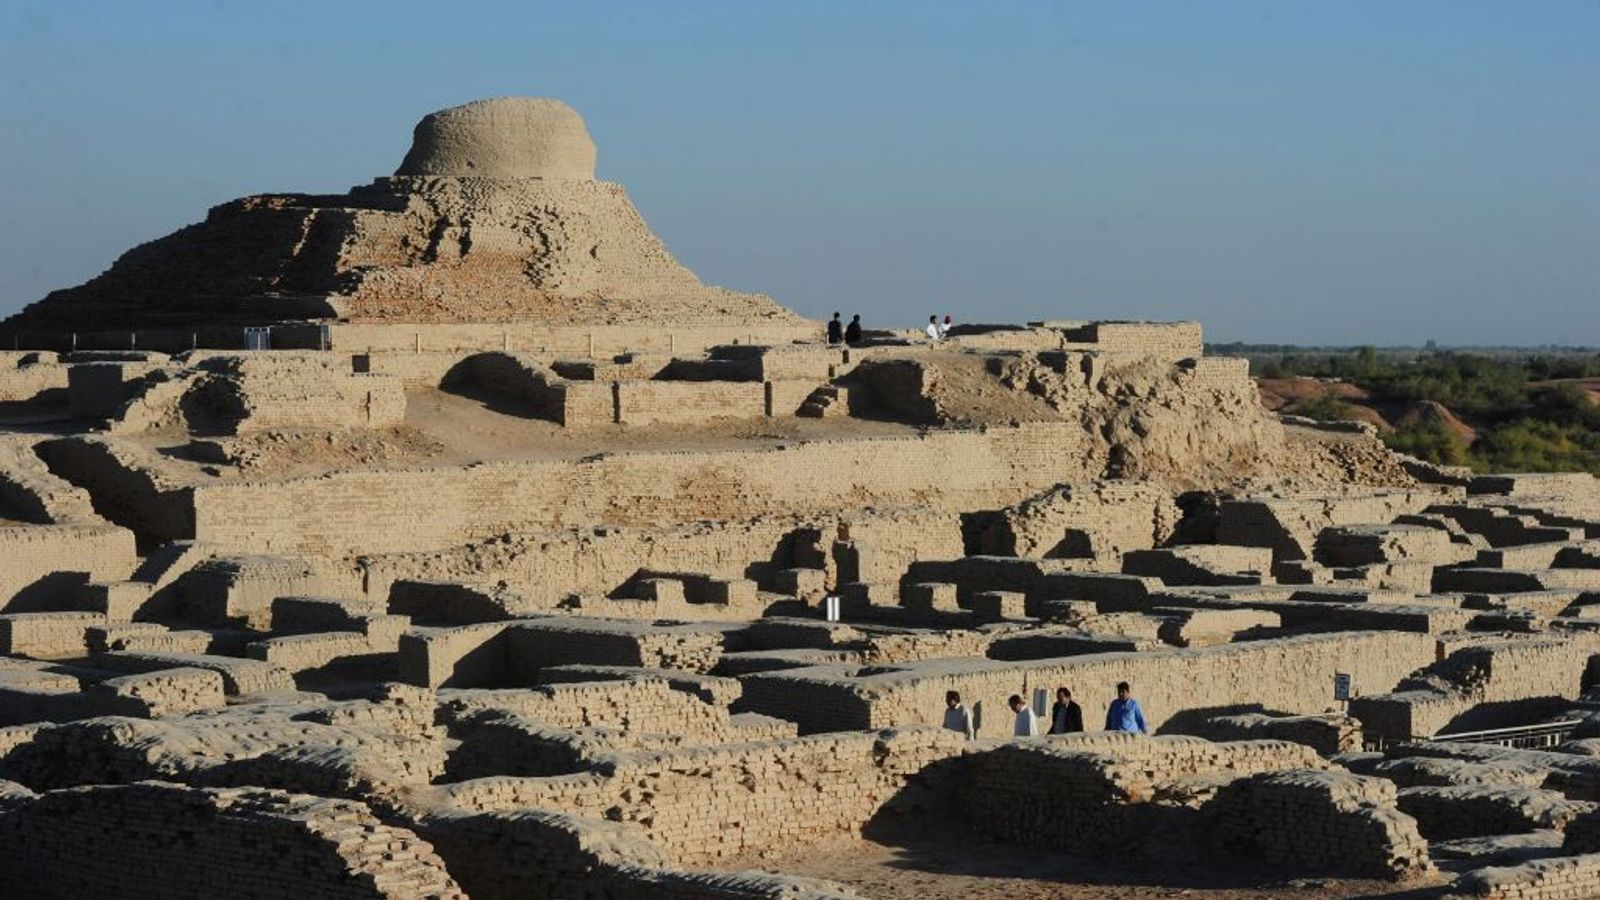 Climate change behind rise and fall of ancient Indus Valley Civilisation, says study - Sky News